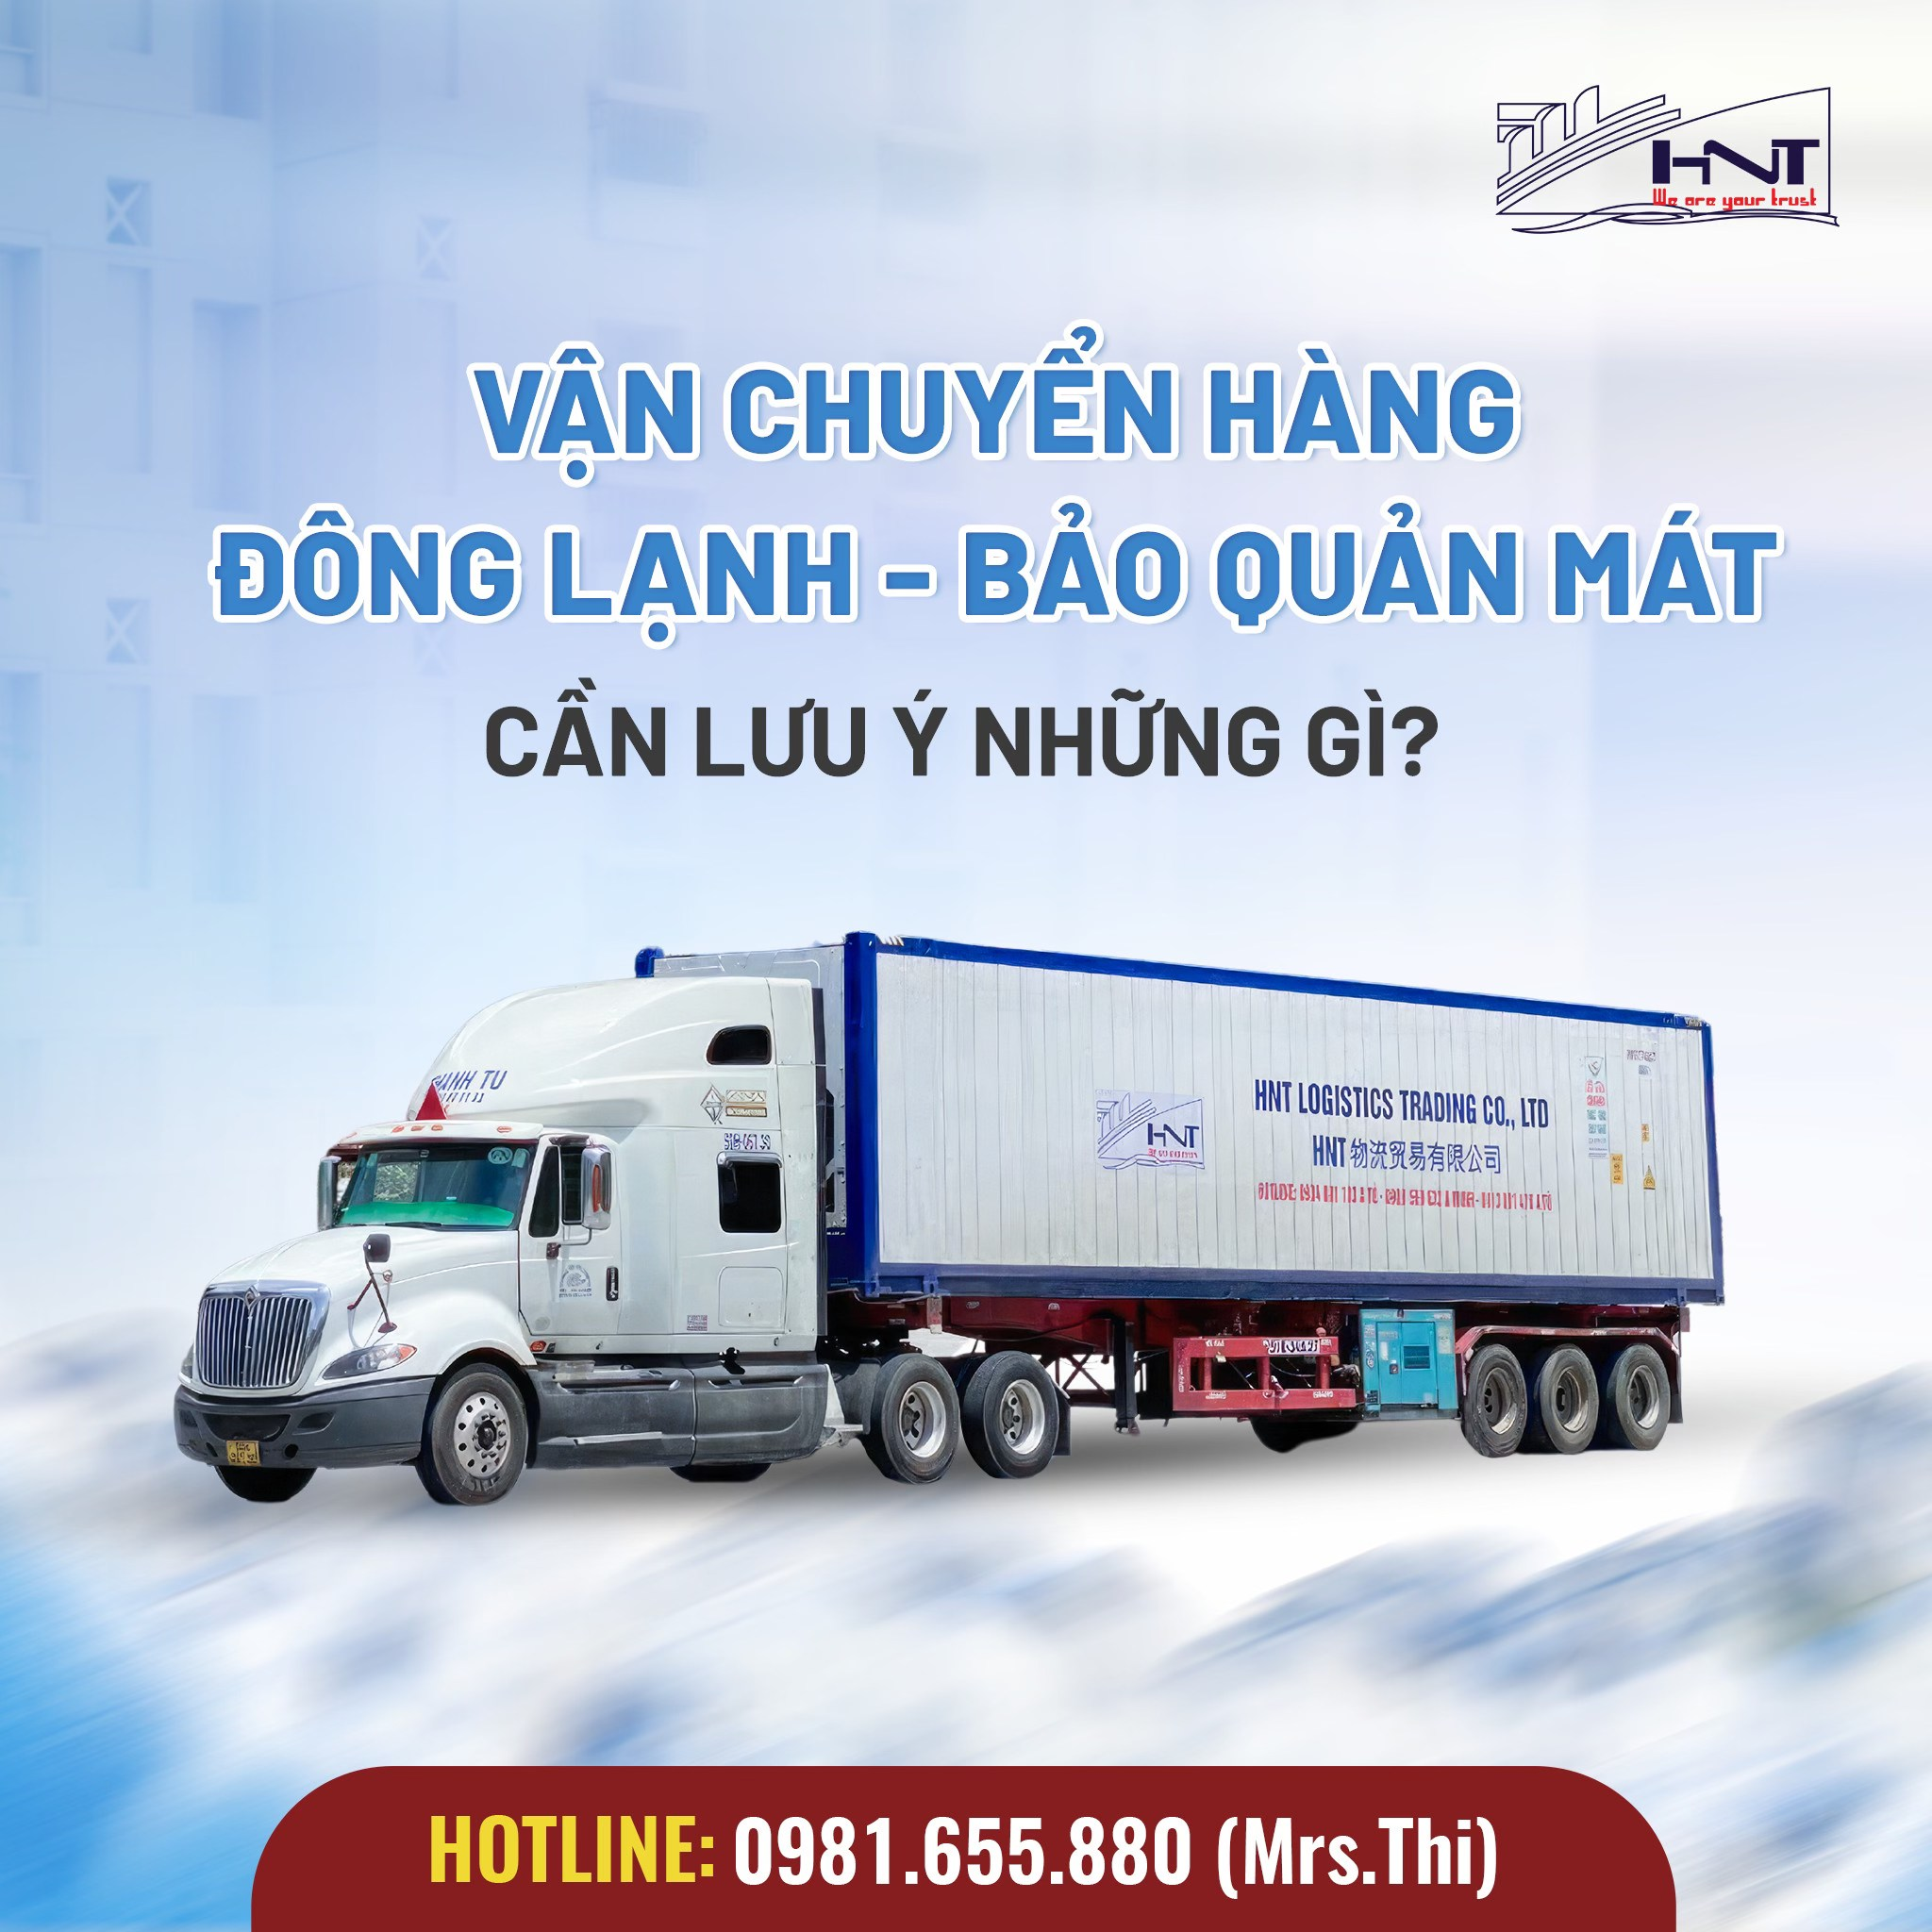 What Should Be Noted When Transporting Frozen Goods?